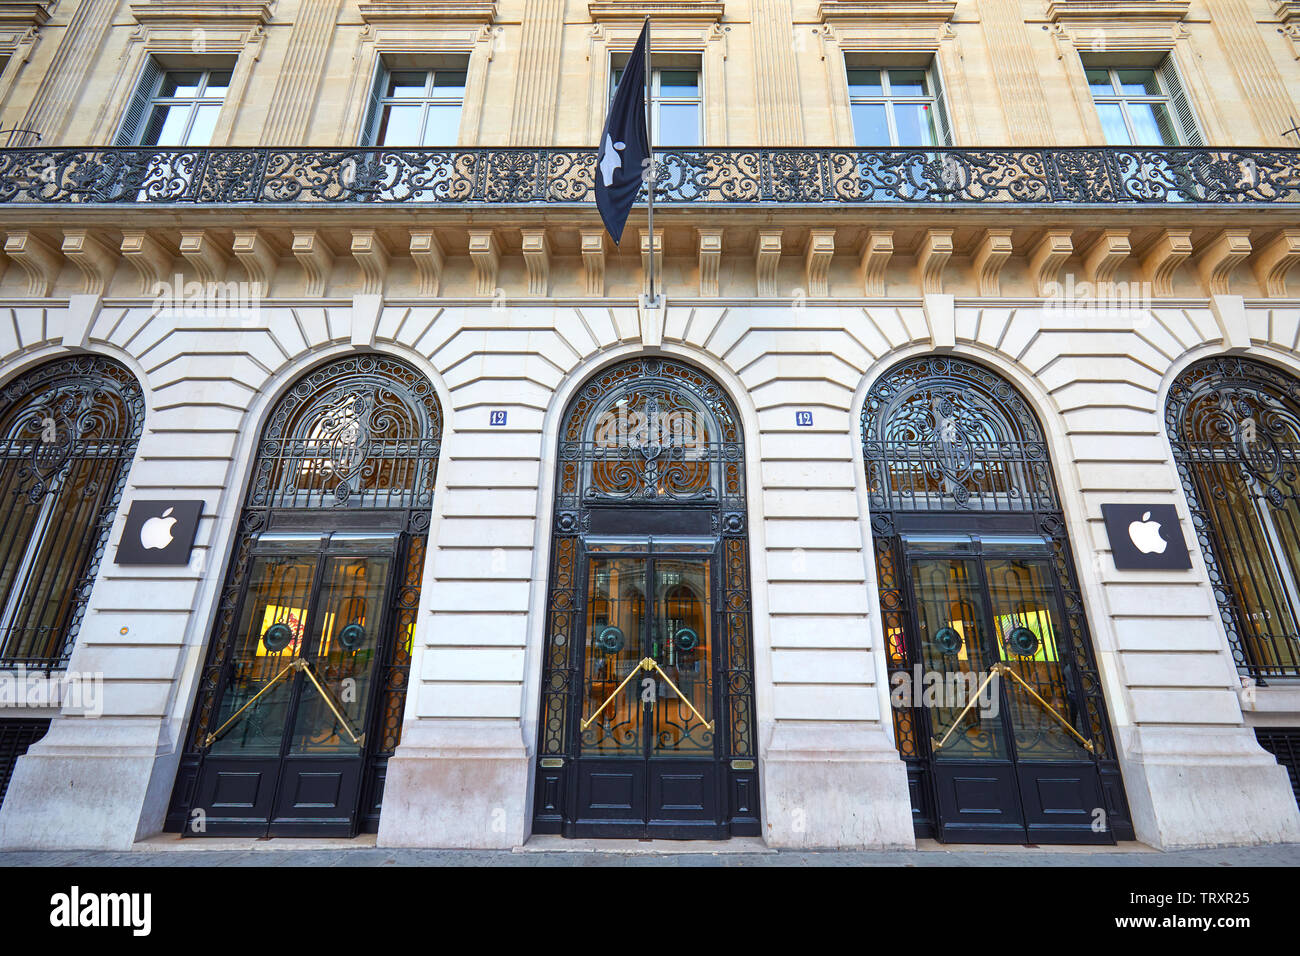 PARIS, FRANCE - JULY 21, 2017: Closed Apple store exterior and building facade in Paris, France. Stock Photo